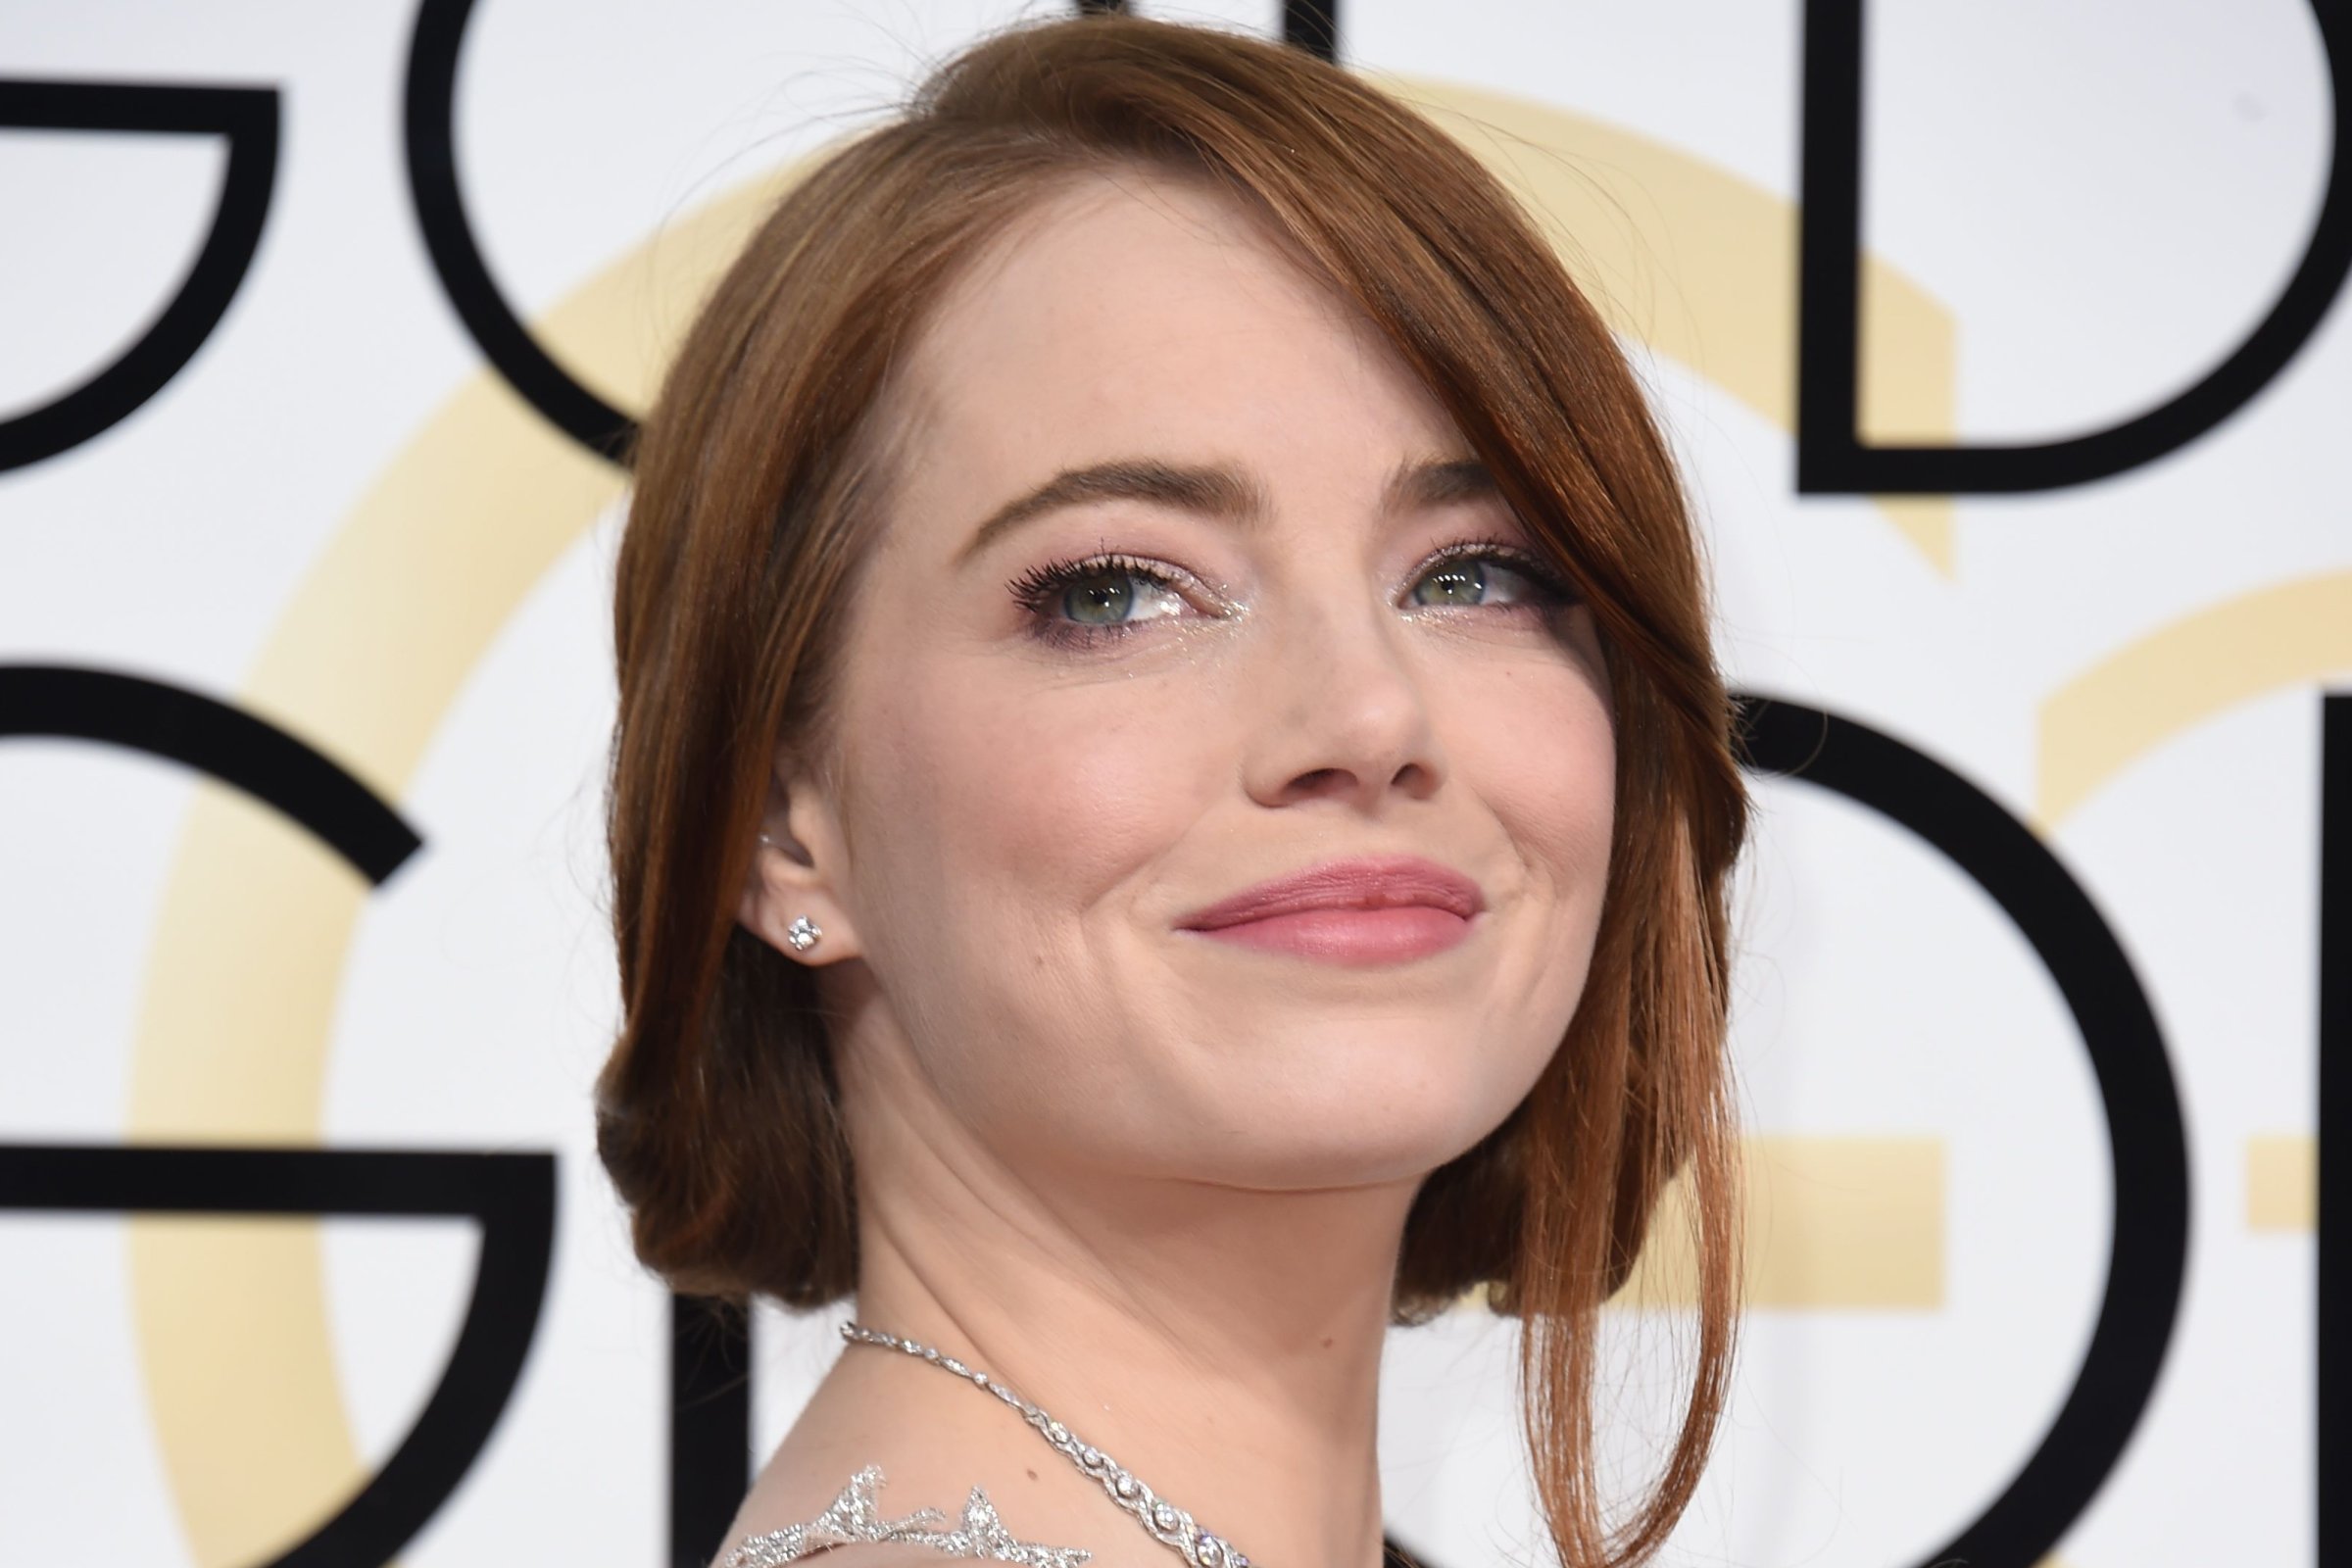 Emma Stone arrives at the 74th annual Golden Globe Awards, on Jan. 8, 2017 in Beverly Hills, Calif.